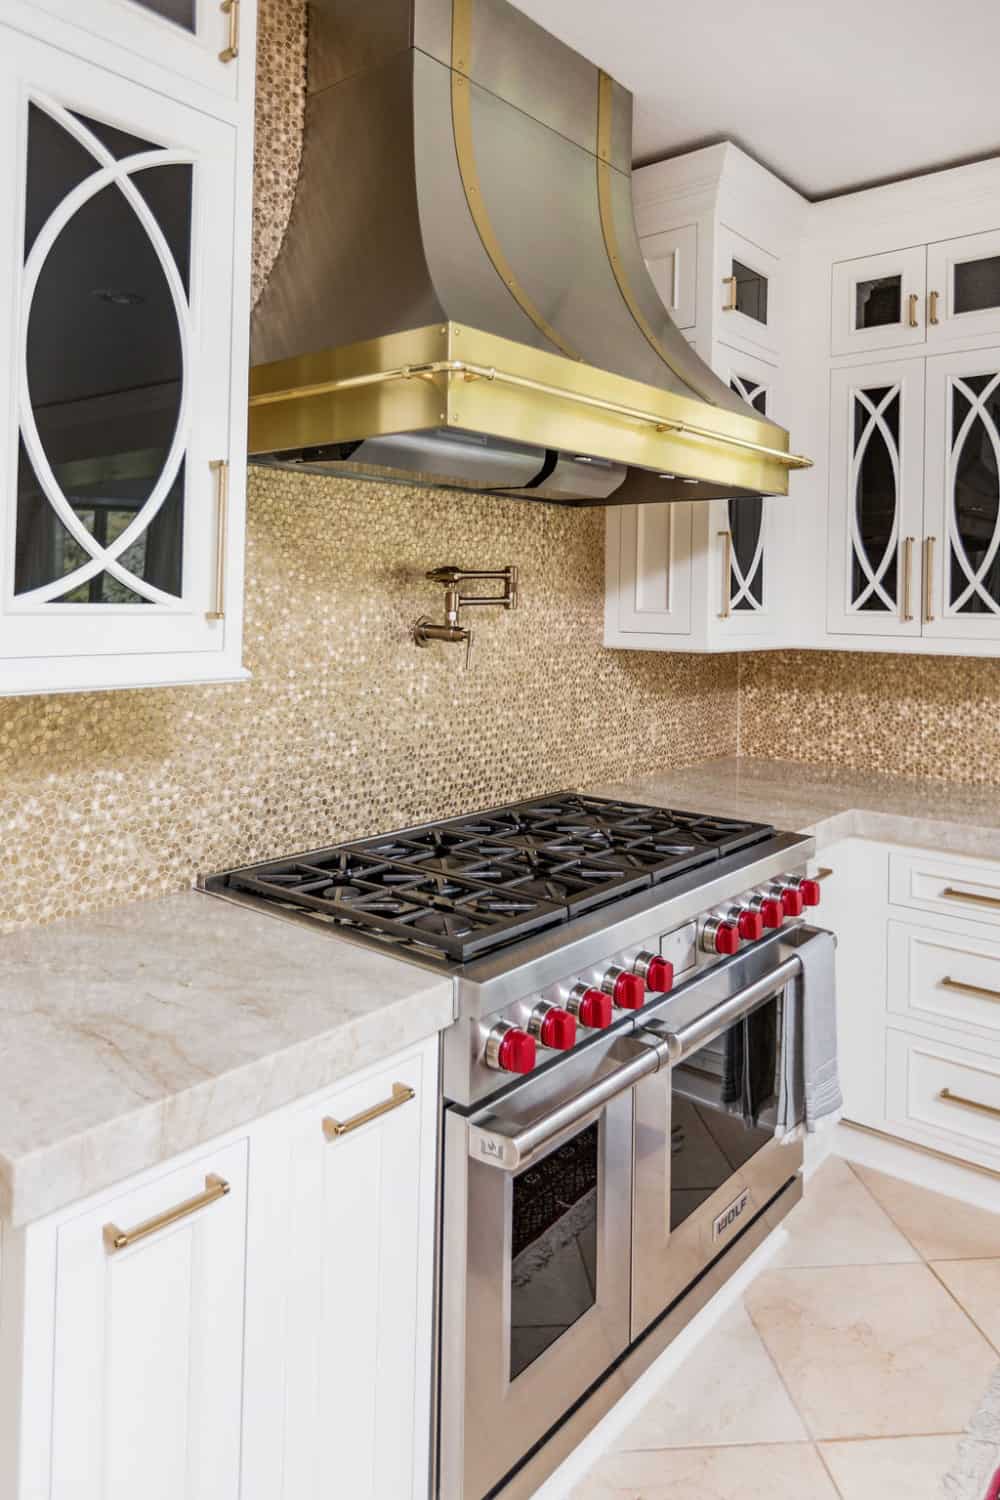 Nicholas Design Build | A remodeled kitchen with a white and gold color scheme, equipped with a stove and oven.